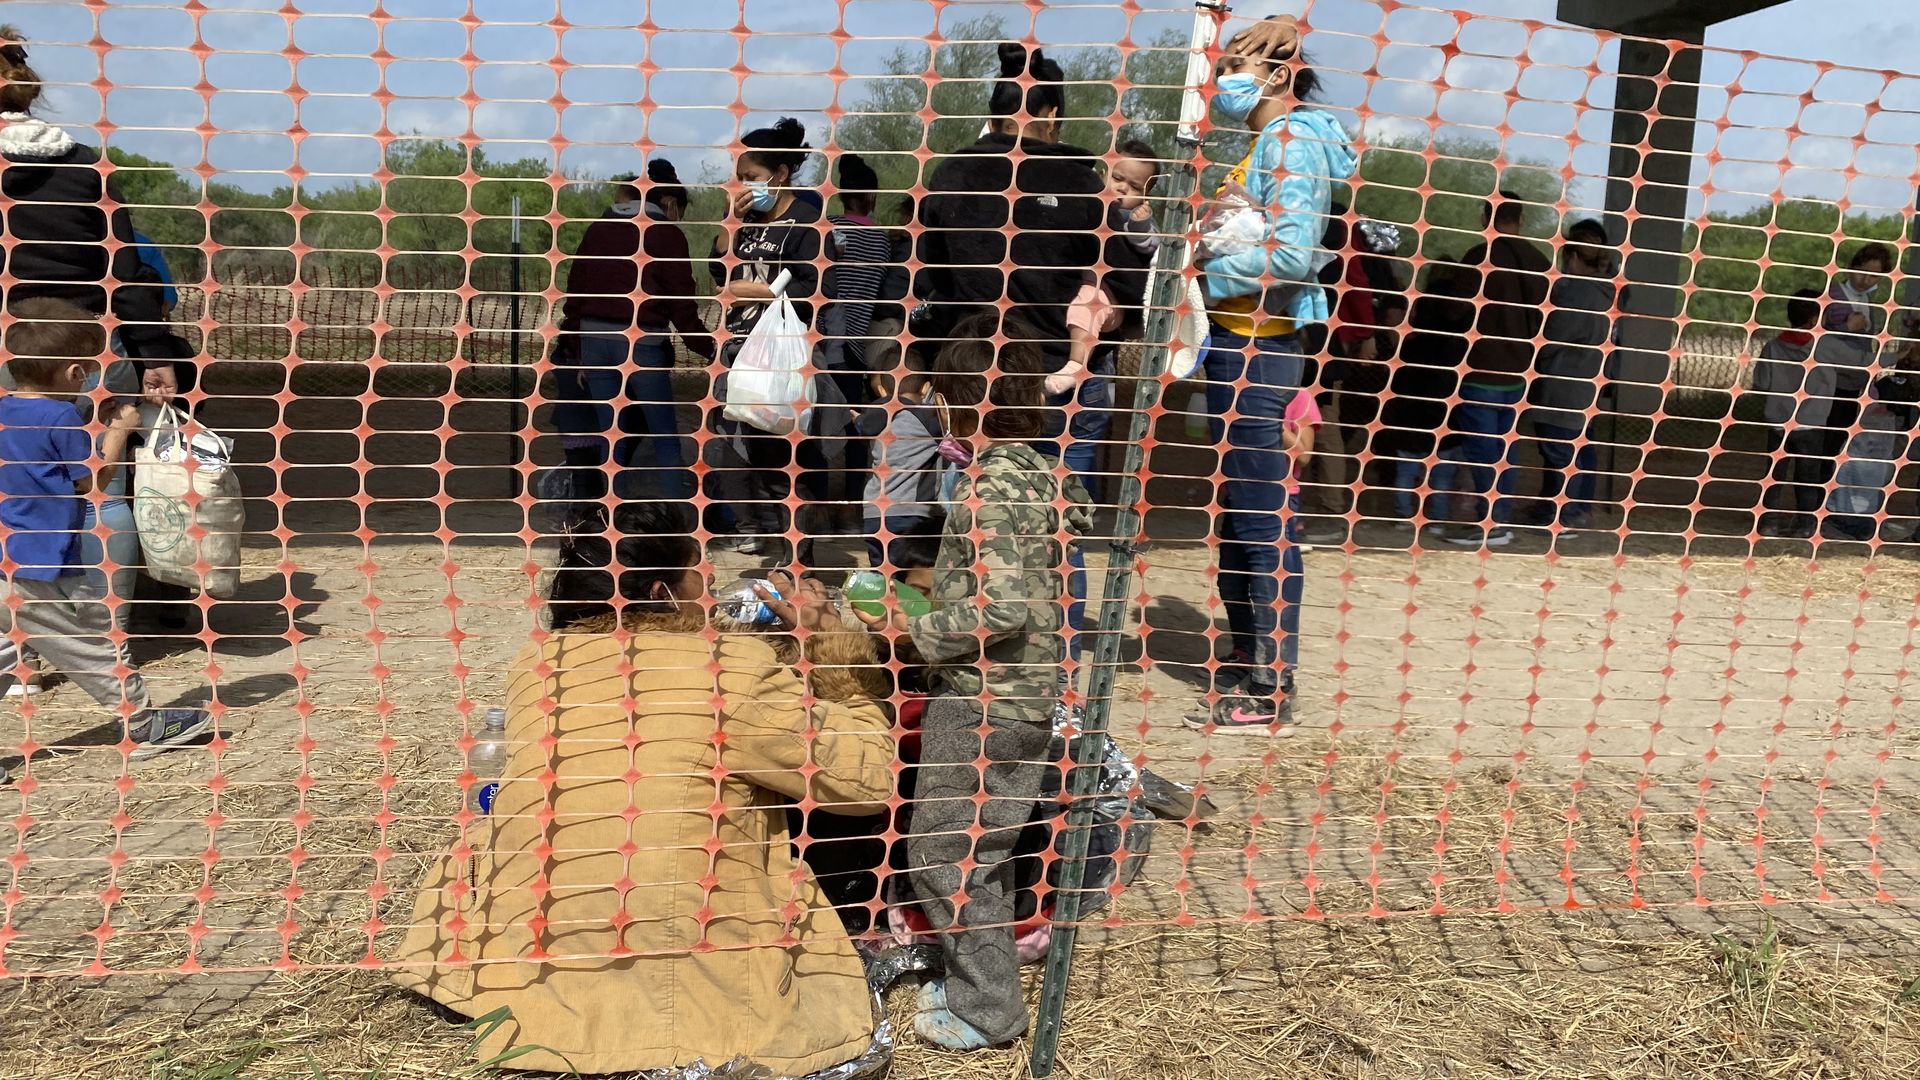 Migrant mothers and young children sit on the ground outside behind orange safety netting. 